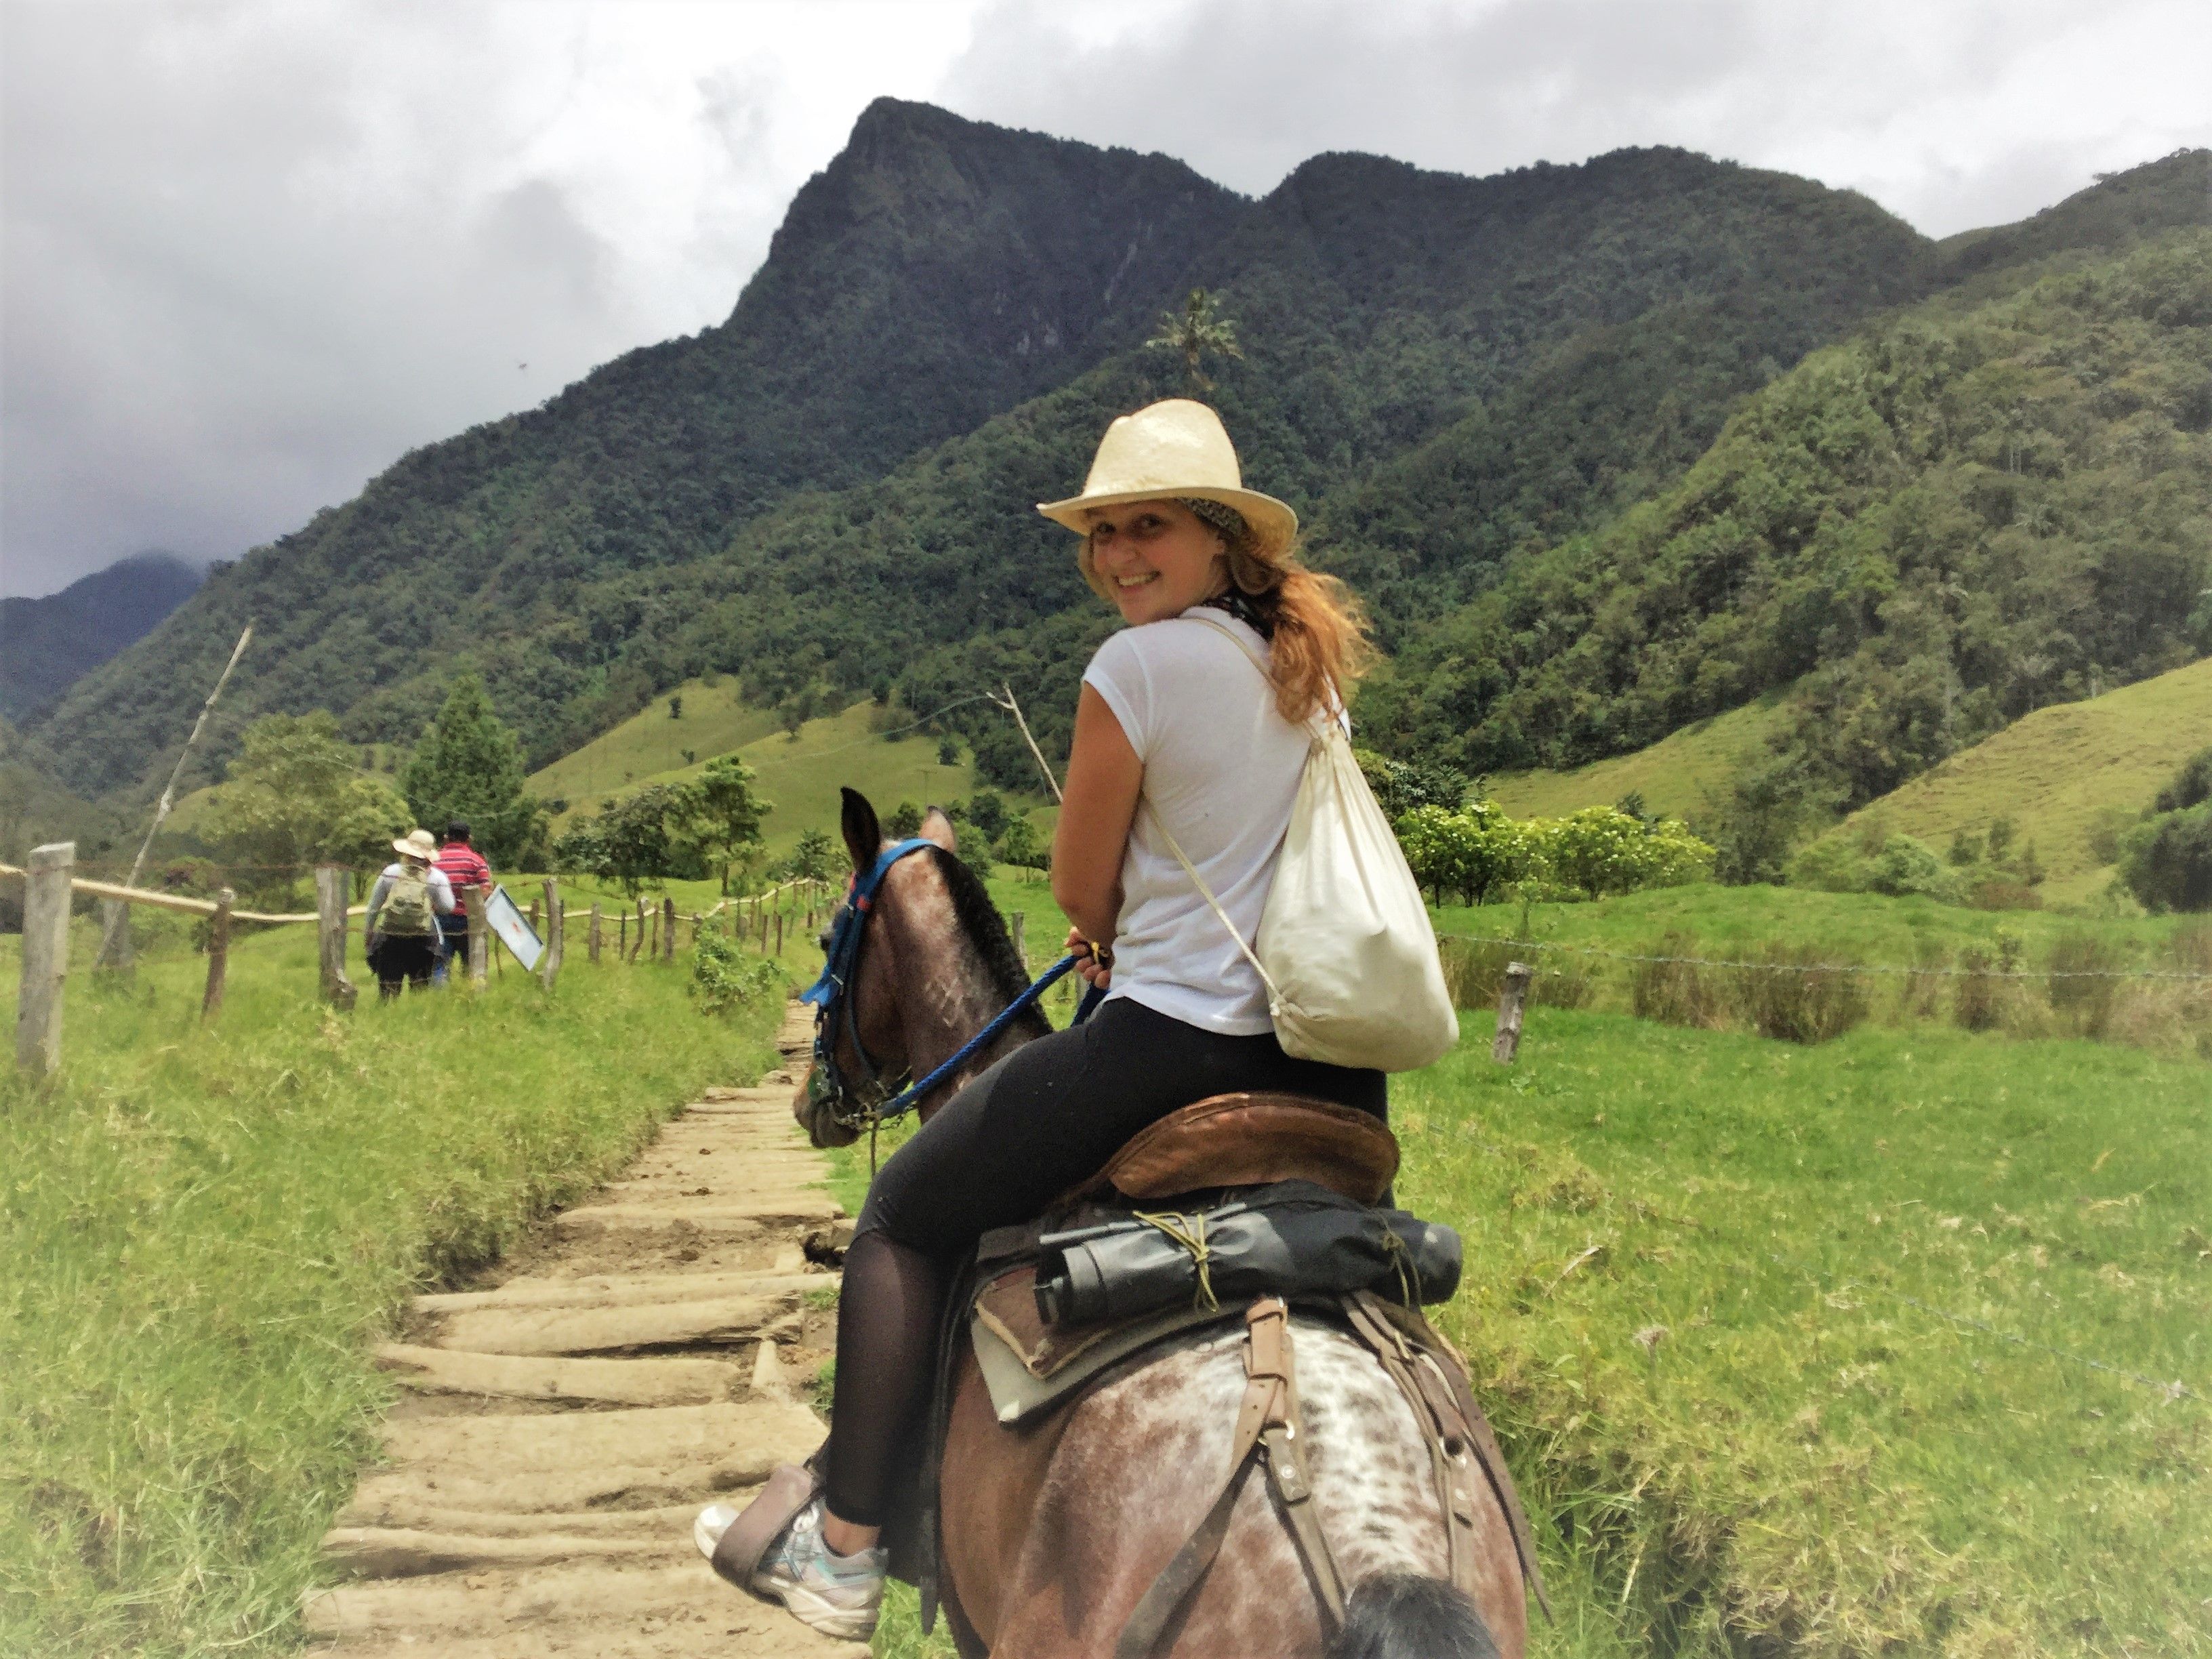 #2 Horseback riding to a waterfall and hiking at Cocora Valley